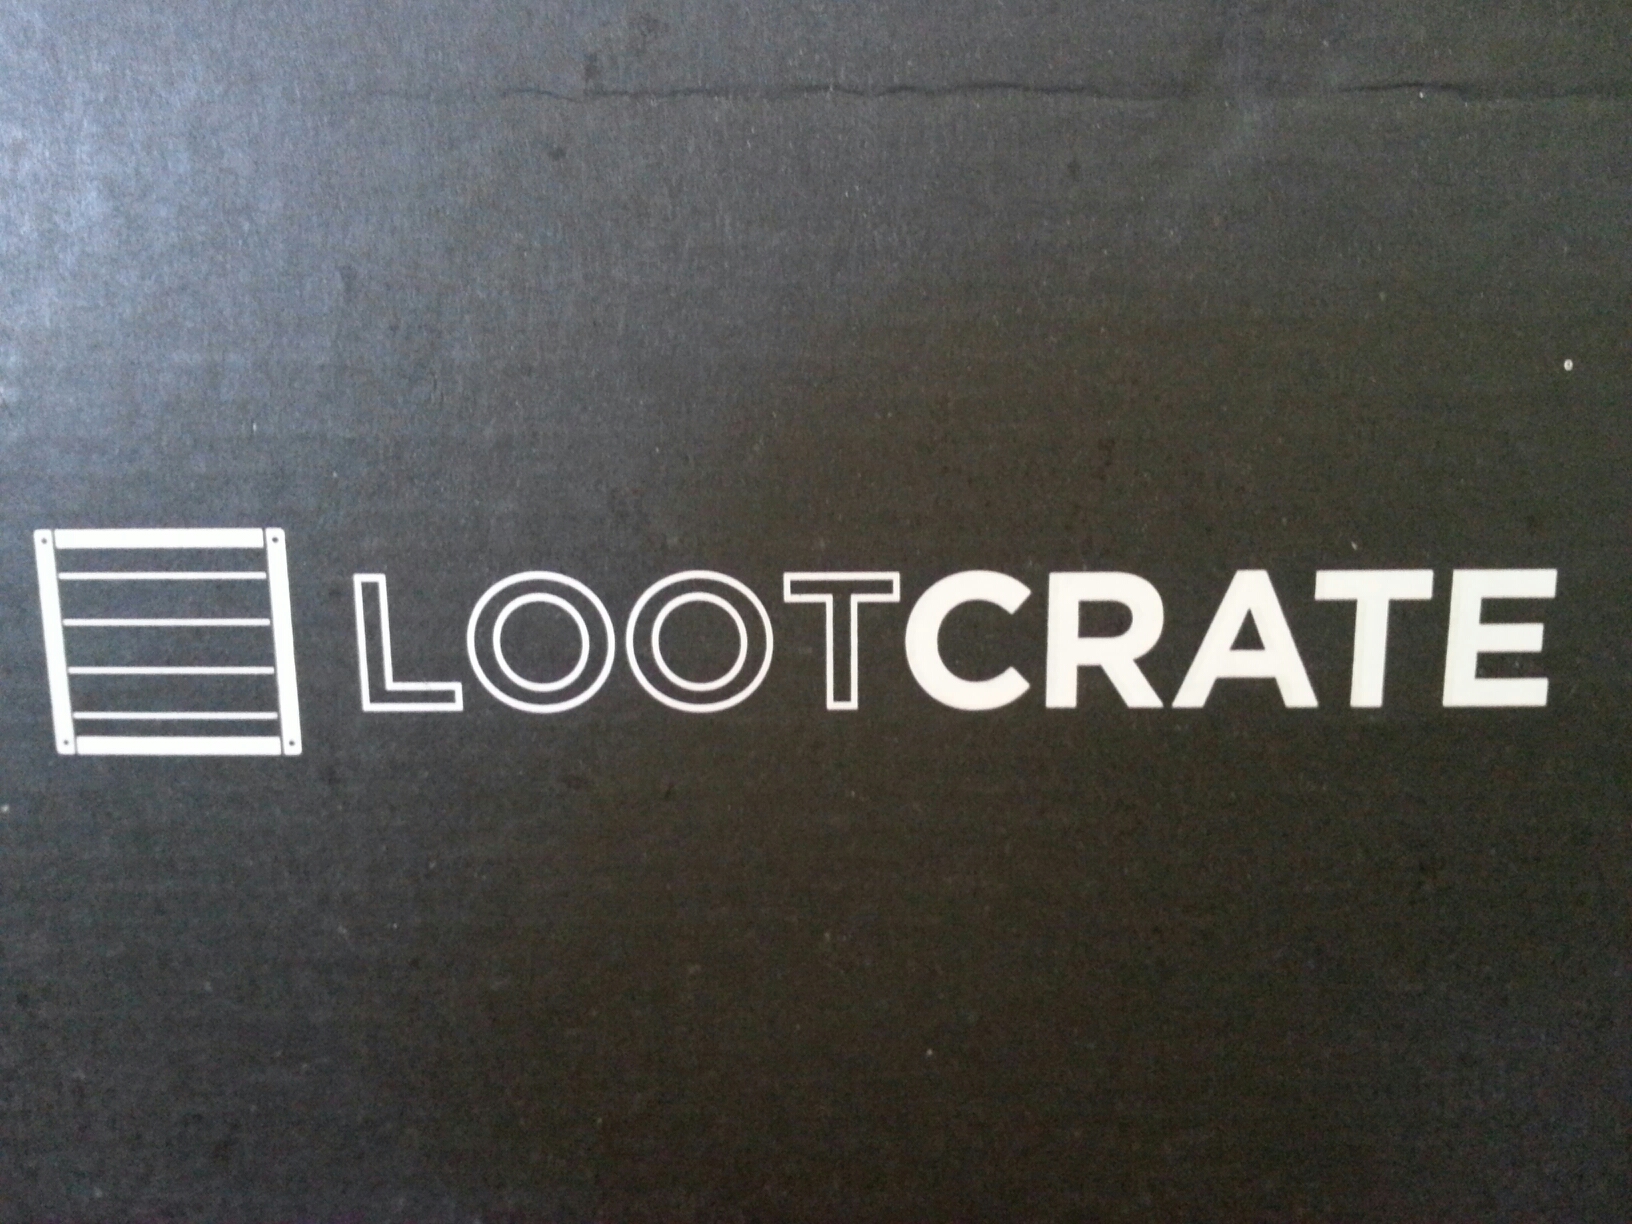 Loot crate april 2014 review and unboxing